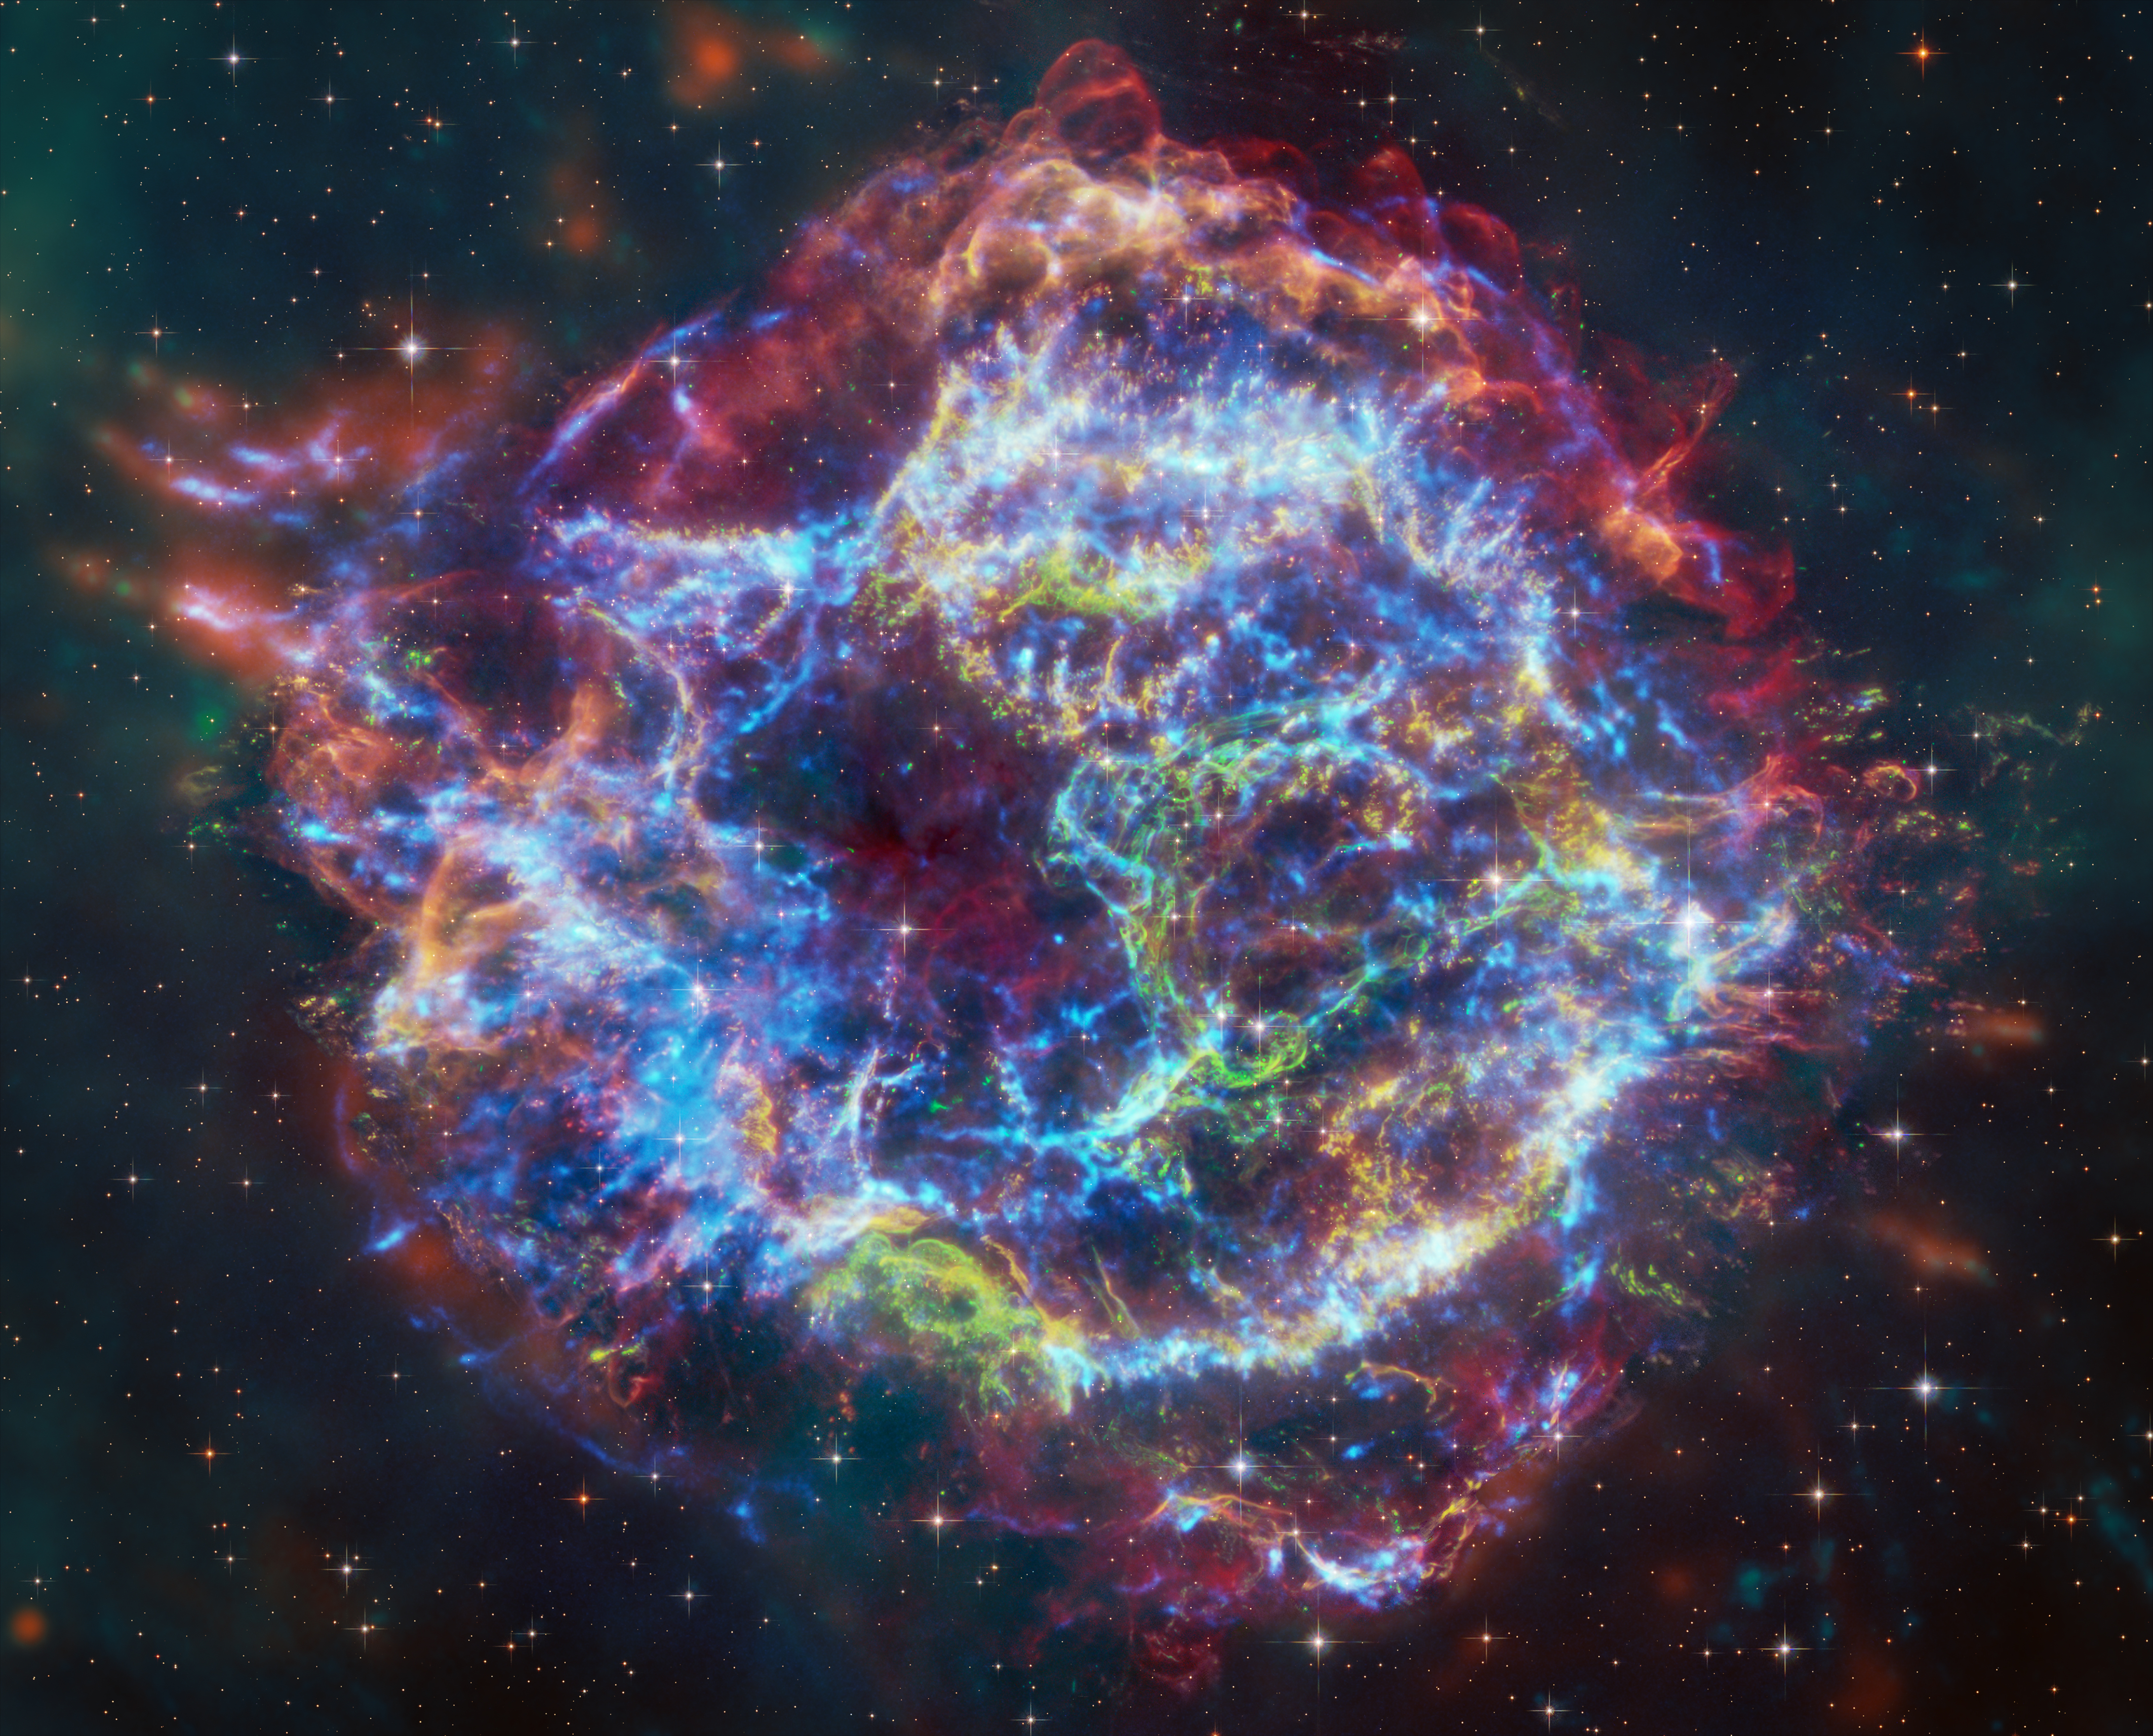 A composite image of Cassiopeia A, using data from Chandra, Hubble, Webb and Spitzer. The supernova remnant is roughly round, with colorful ripples on the edges and filaments showing the structure of the gas inside. Behind Cassiopeia A is a field of stars.